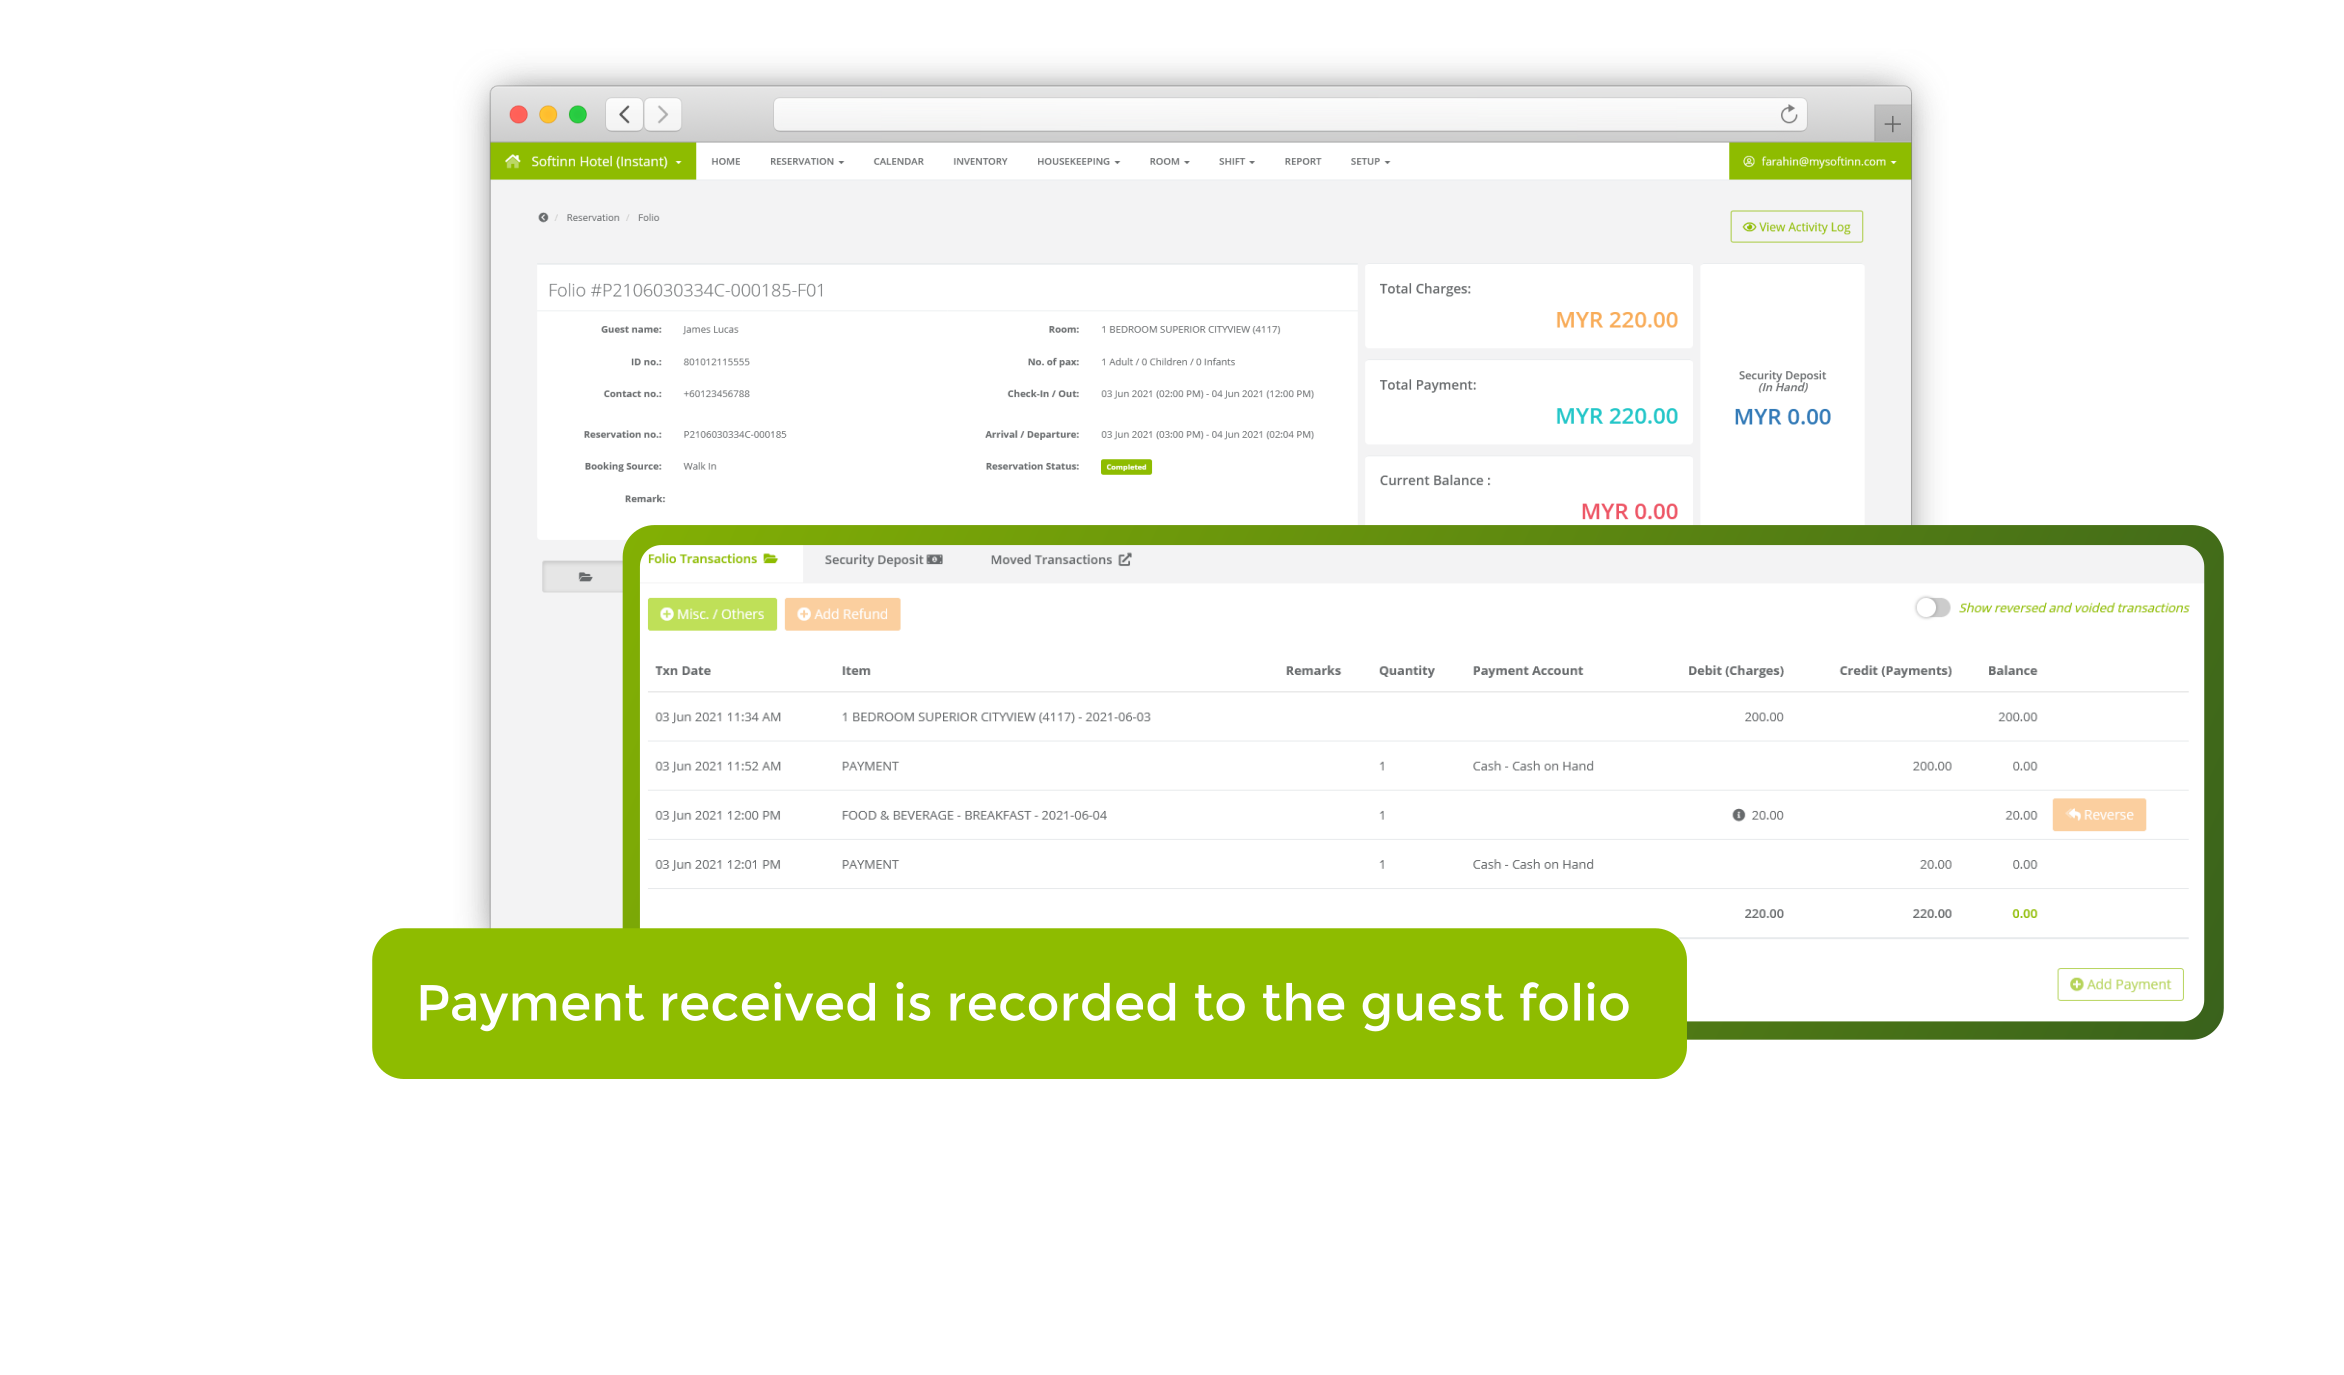 Payment received is recorded to the guest folio